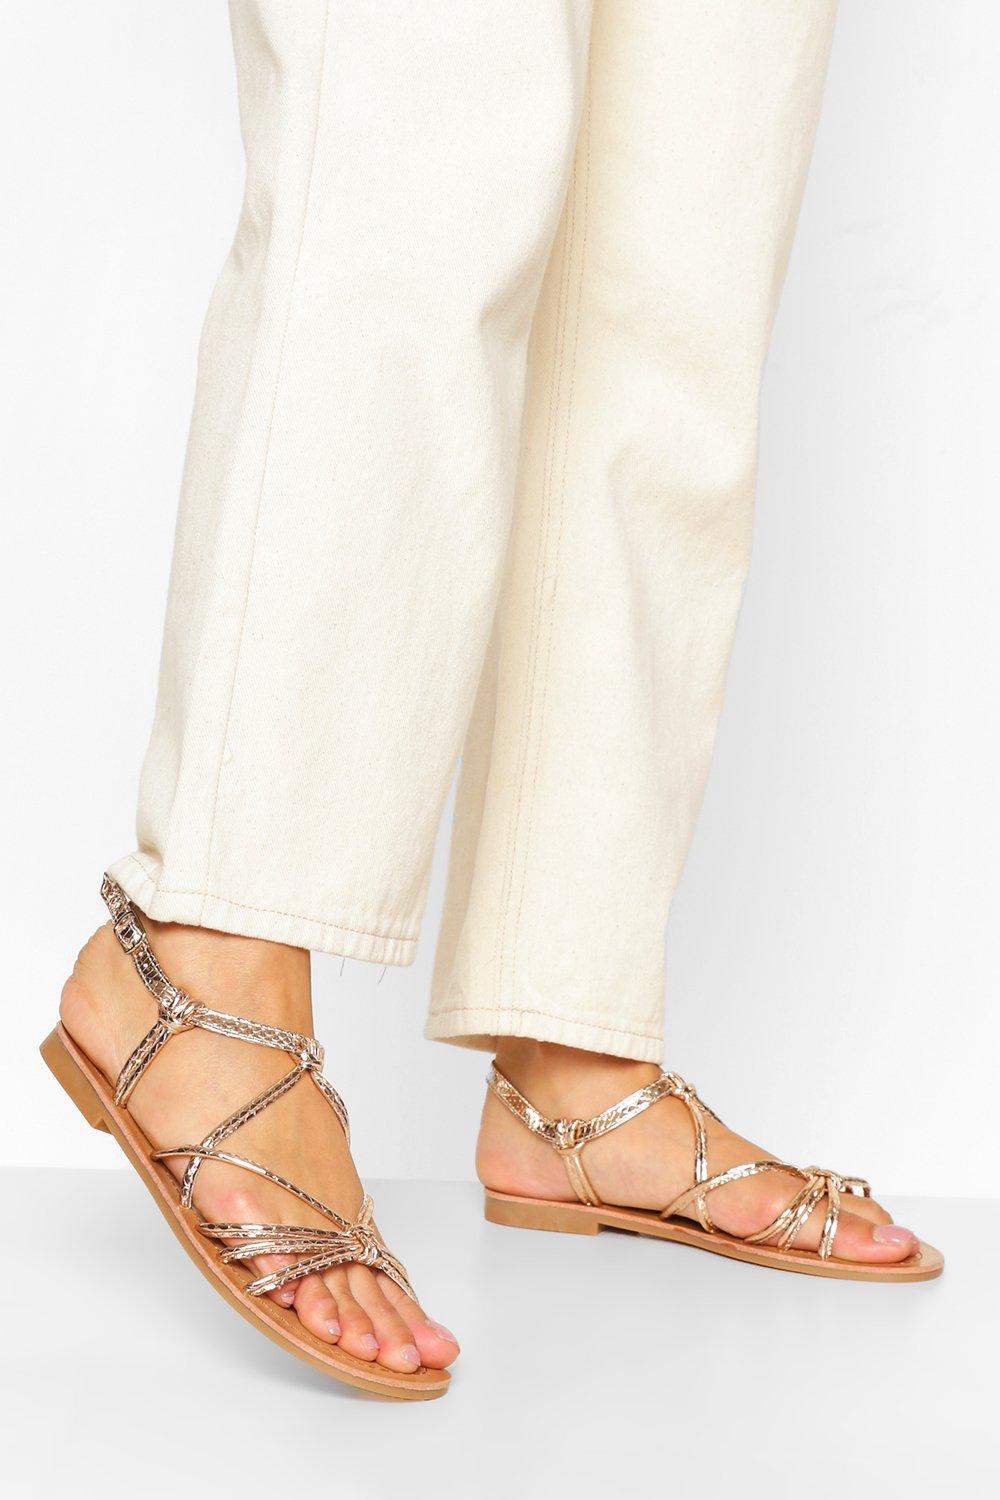 gold strappy flat sandals uk